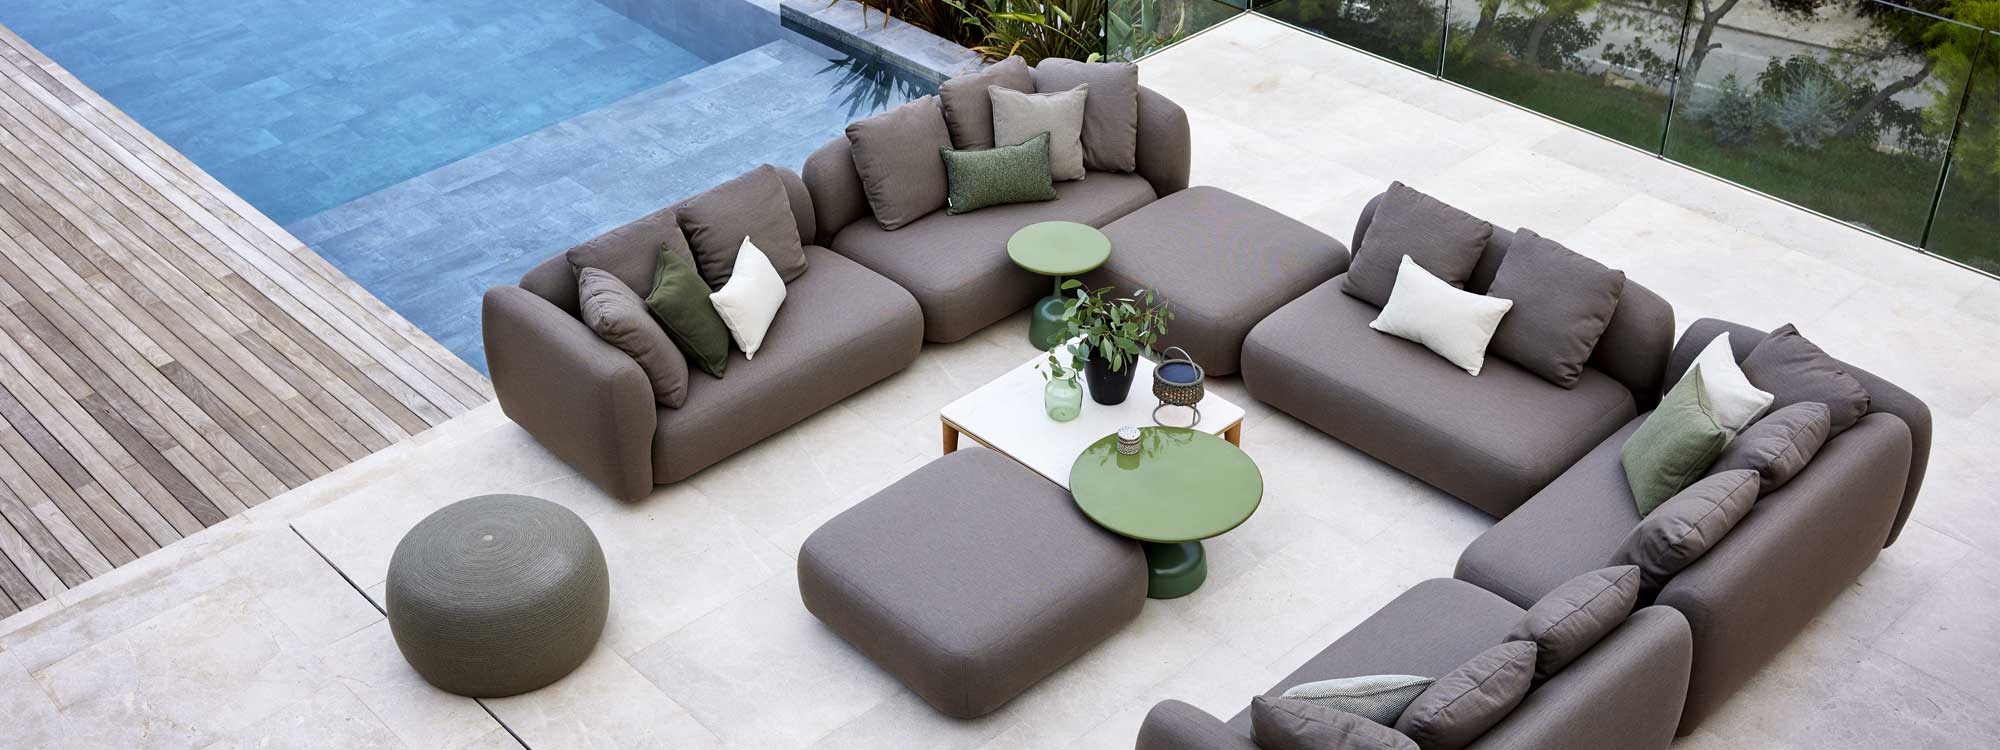 Image of aerial view of Cane-line Capture modular garden sofa and ottoman shown on terrace next to swimming pool